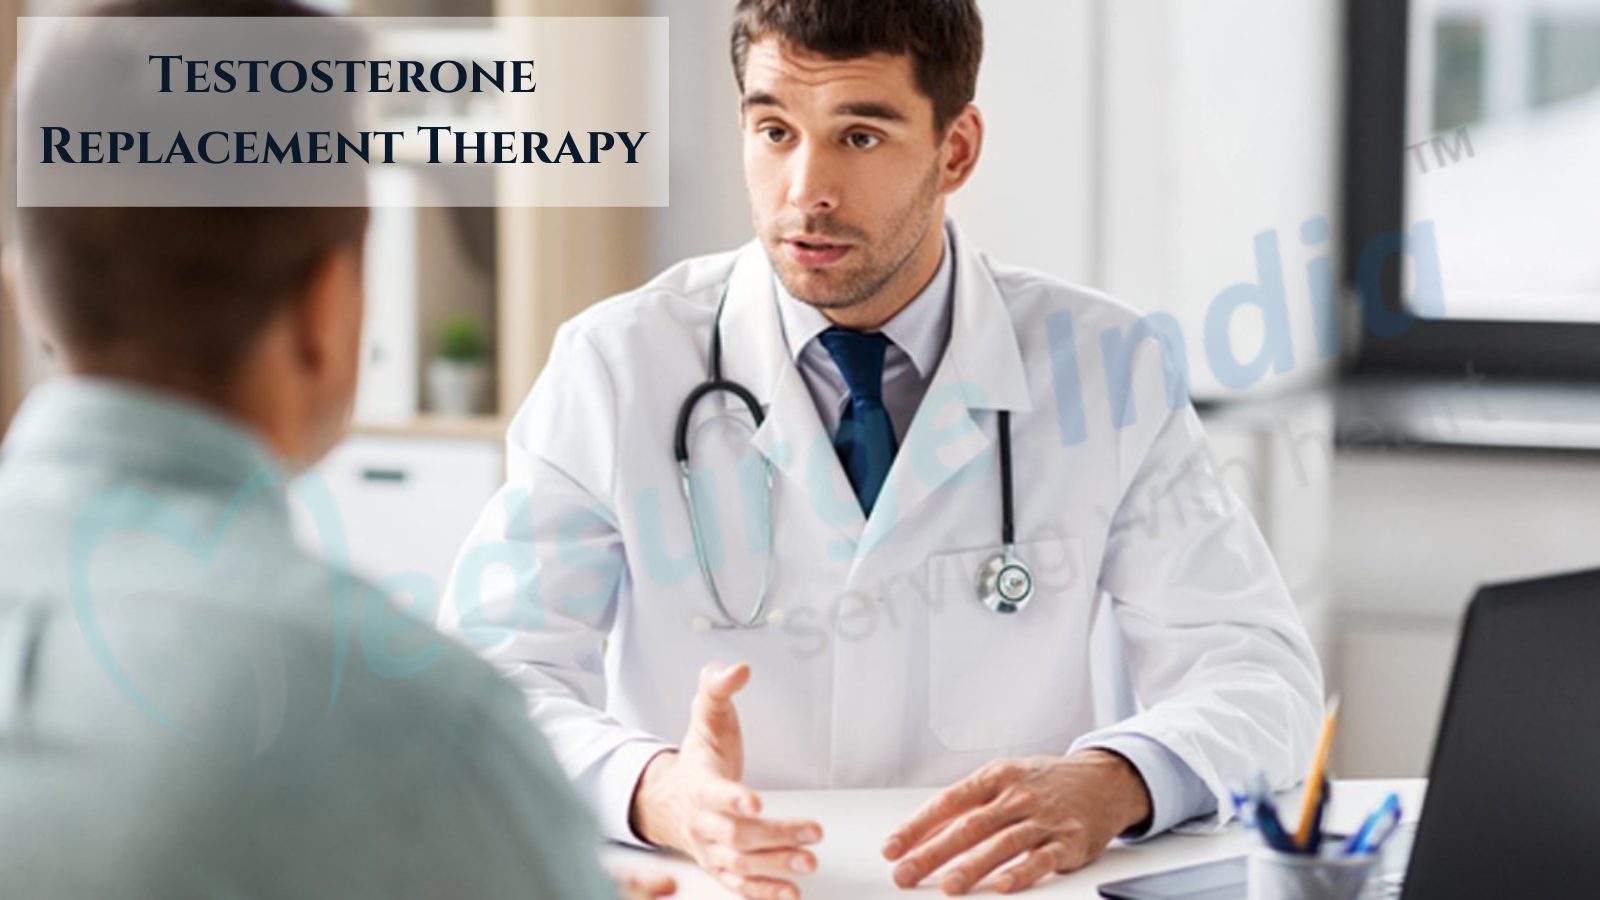 Androgenic hormone or testosterone Replacement Therapy: Will It Be Worthwhile?